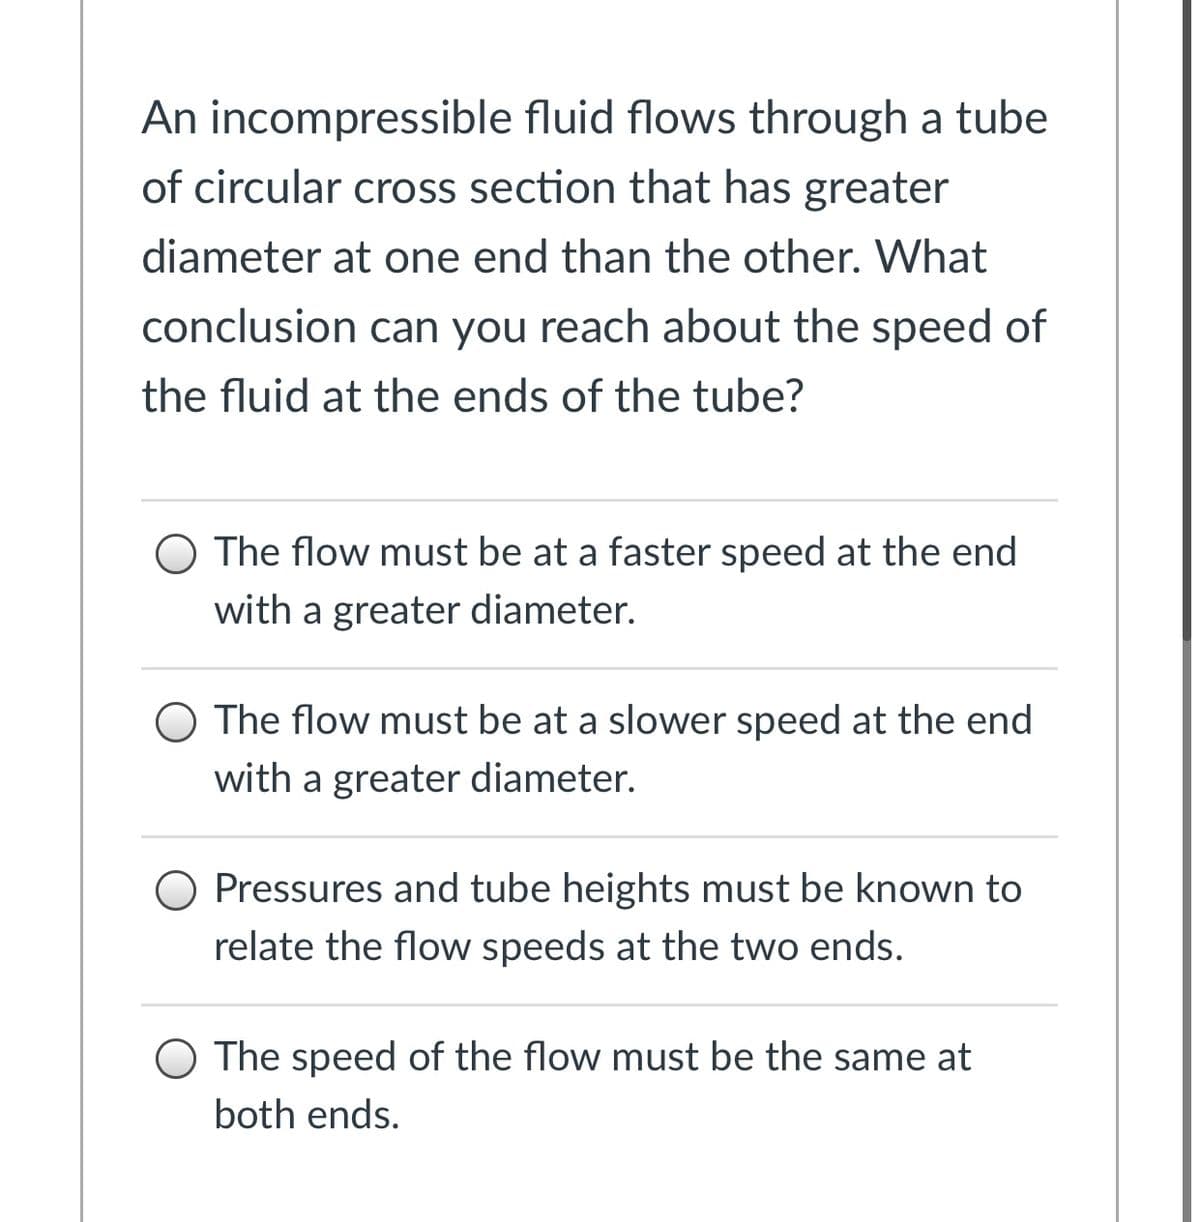 An incompressible fluid flows through a tube
of circular cross section that has greater
diameter at one end than the other. What
conclusion can you reach about the speed of
the fluid at the ends of the tube?
The flow must be at a faster speed at the end
with a greater diameter.
O The flow must be at a slower speed at the end
with a greater diameter.
Pressures and tube heights must be known to
relate the flow speeds at the two ends.
O The speed of the flow must be the same at
both ends.
